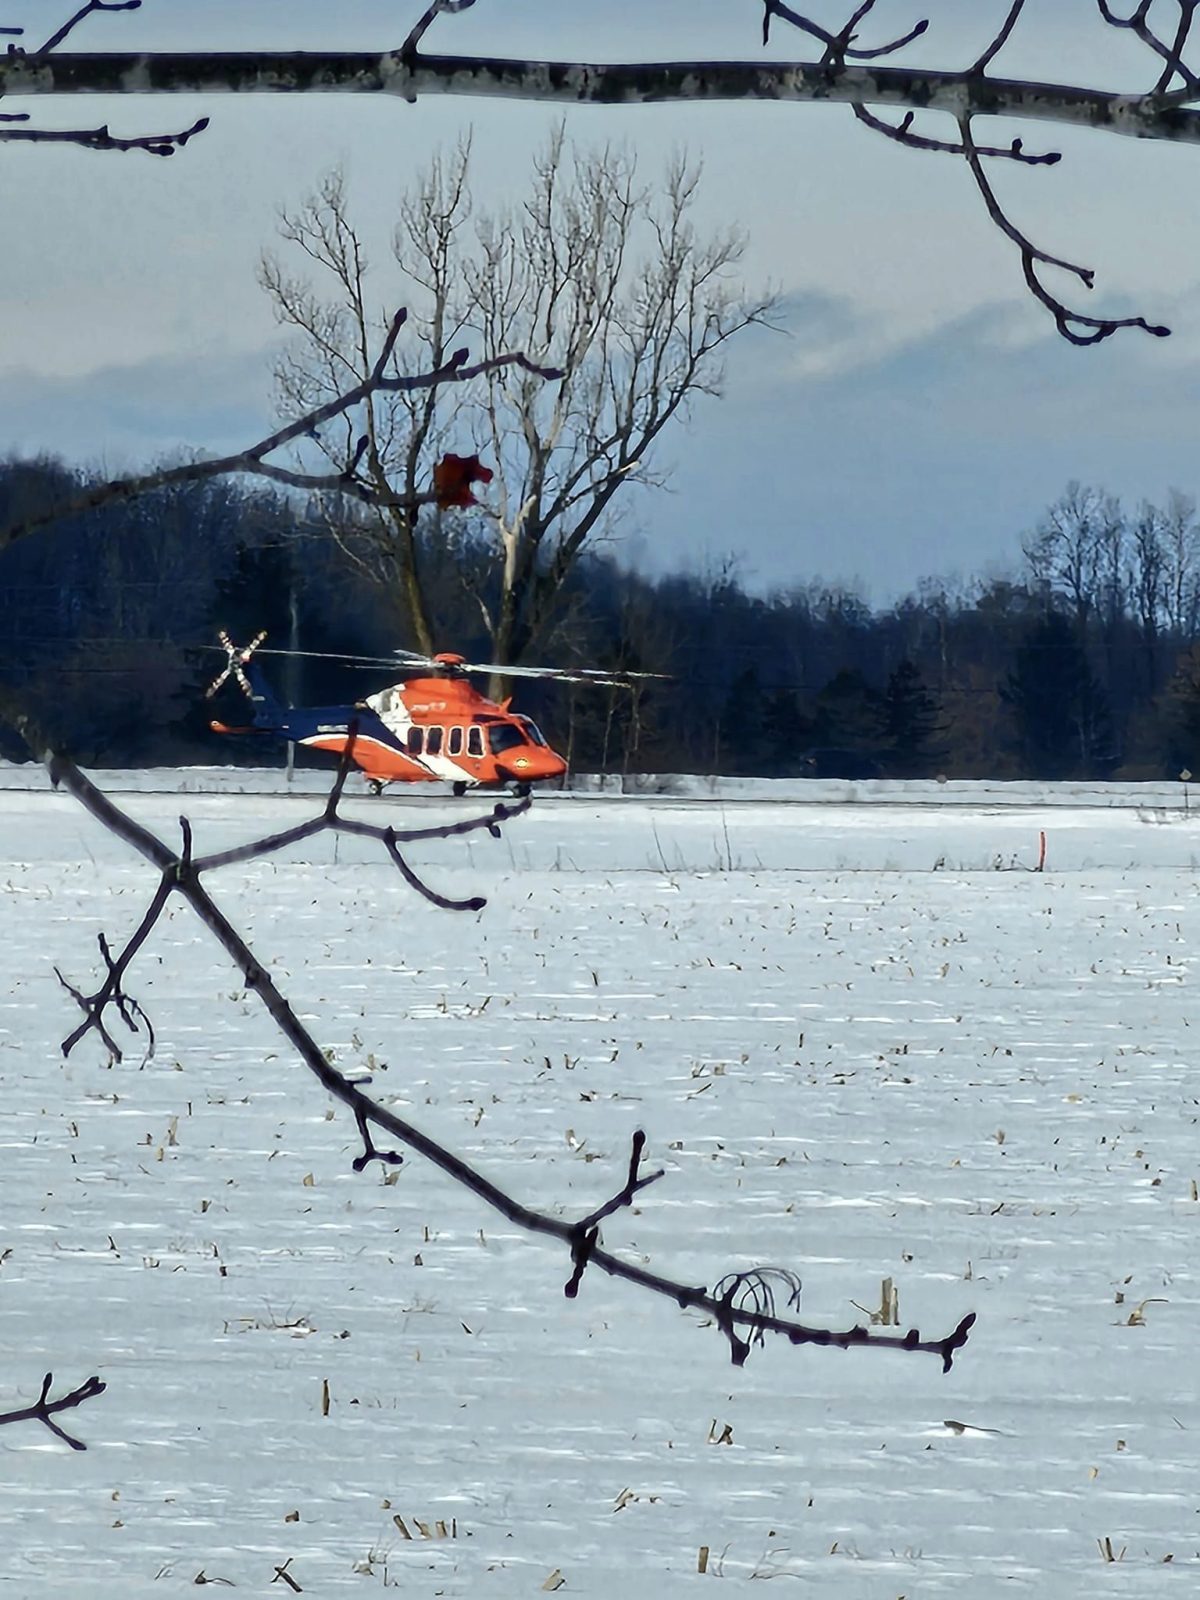 Air ambulance called for fatal tree felling accident in Embrun